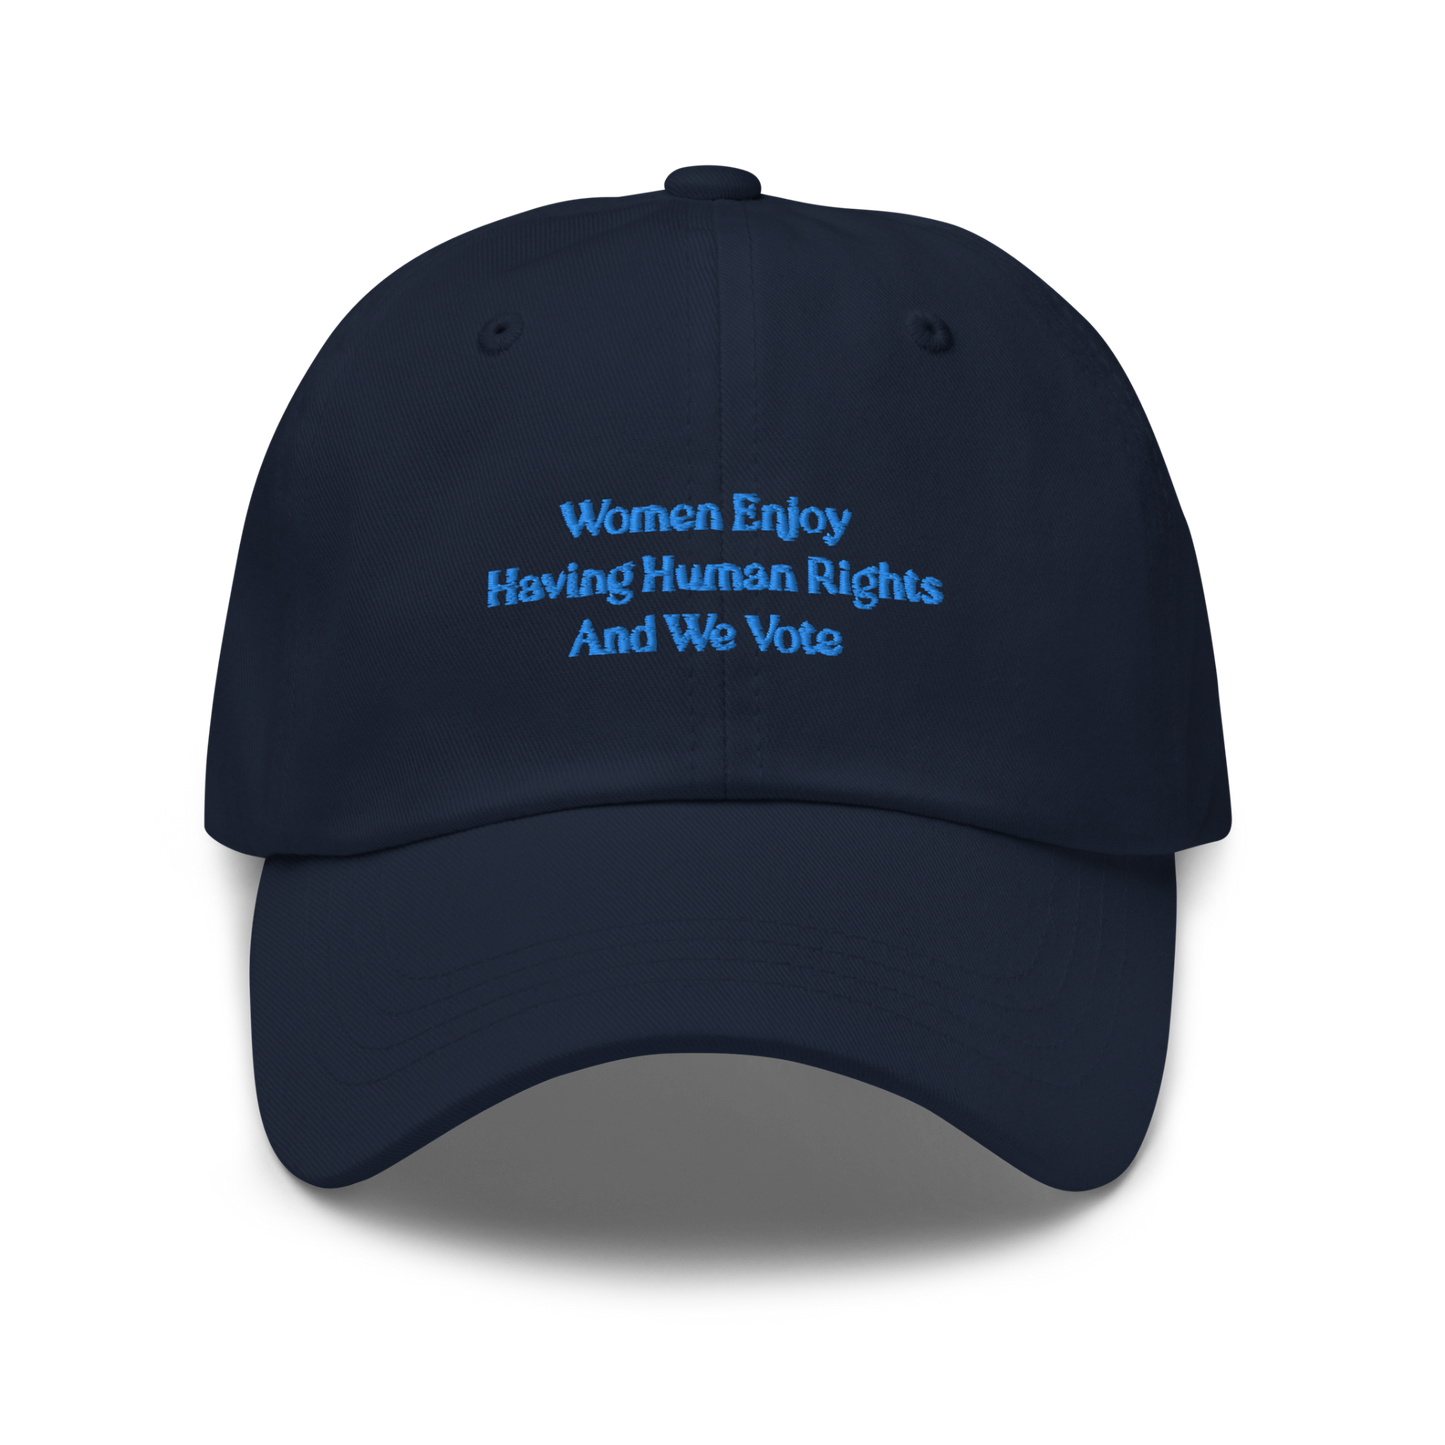 Women Enjoy Human Rights and We Vote Hat